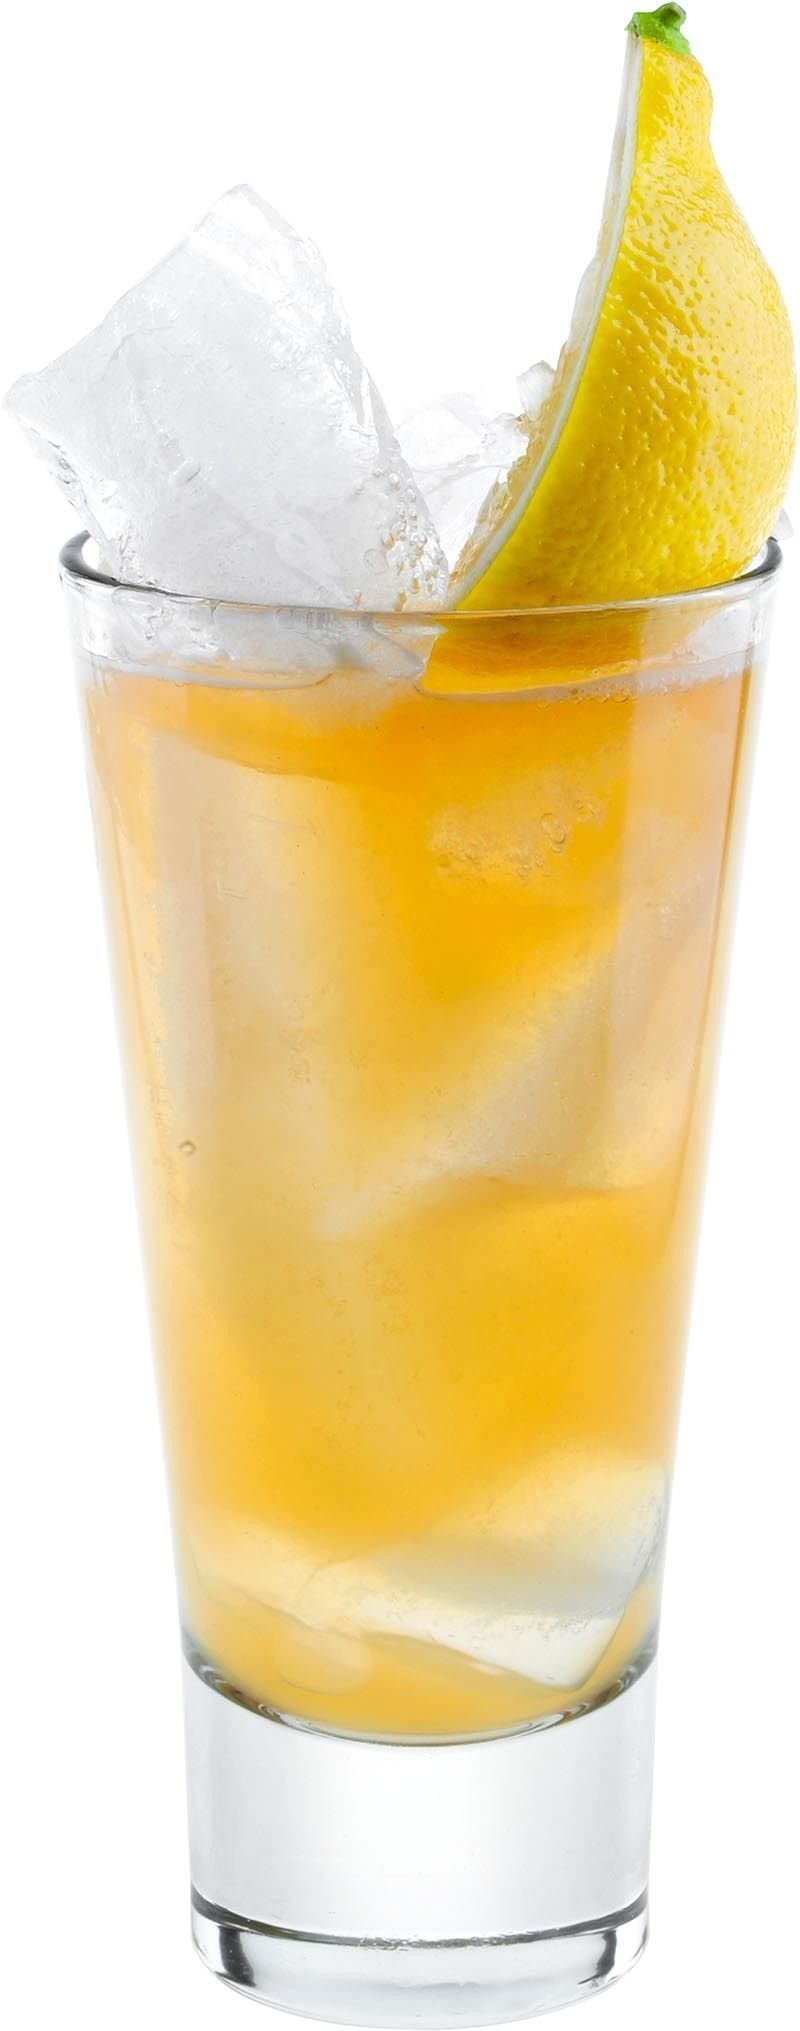 How to Make the Gin with Peach Tea